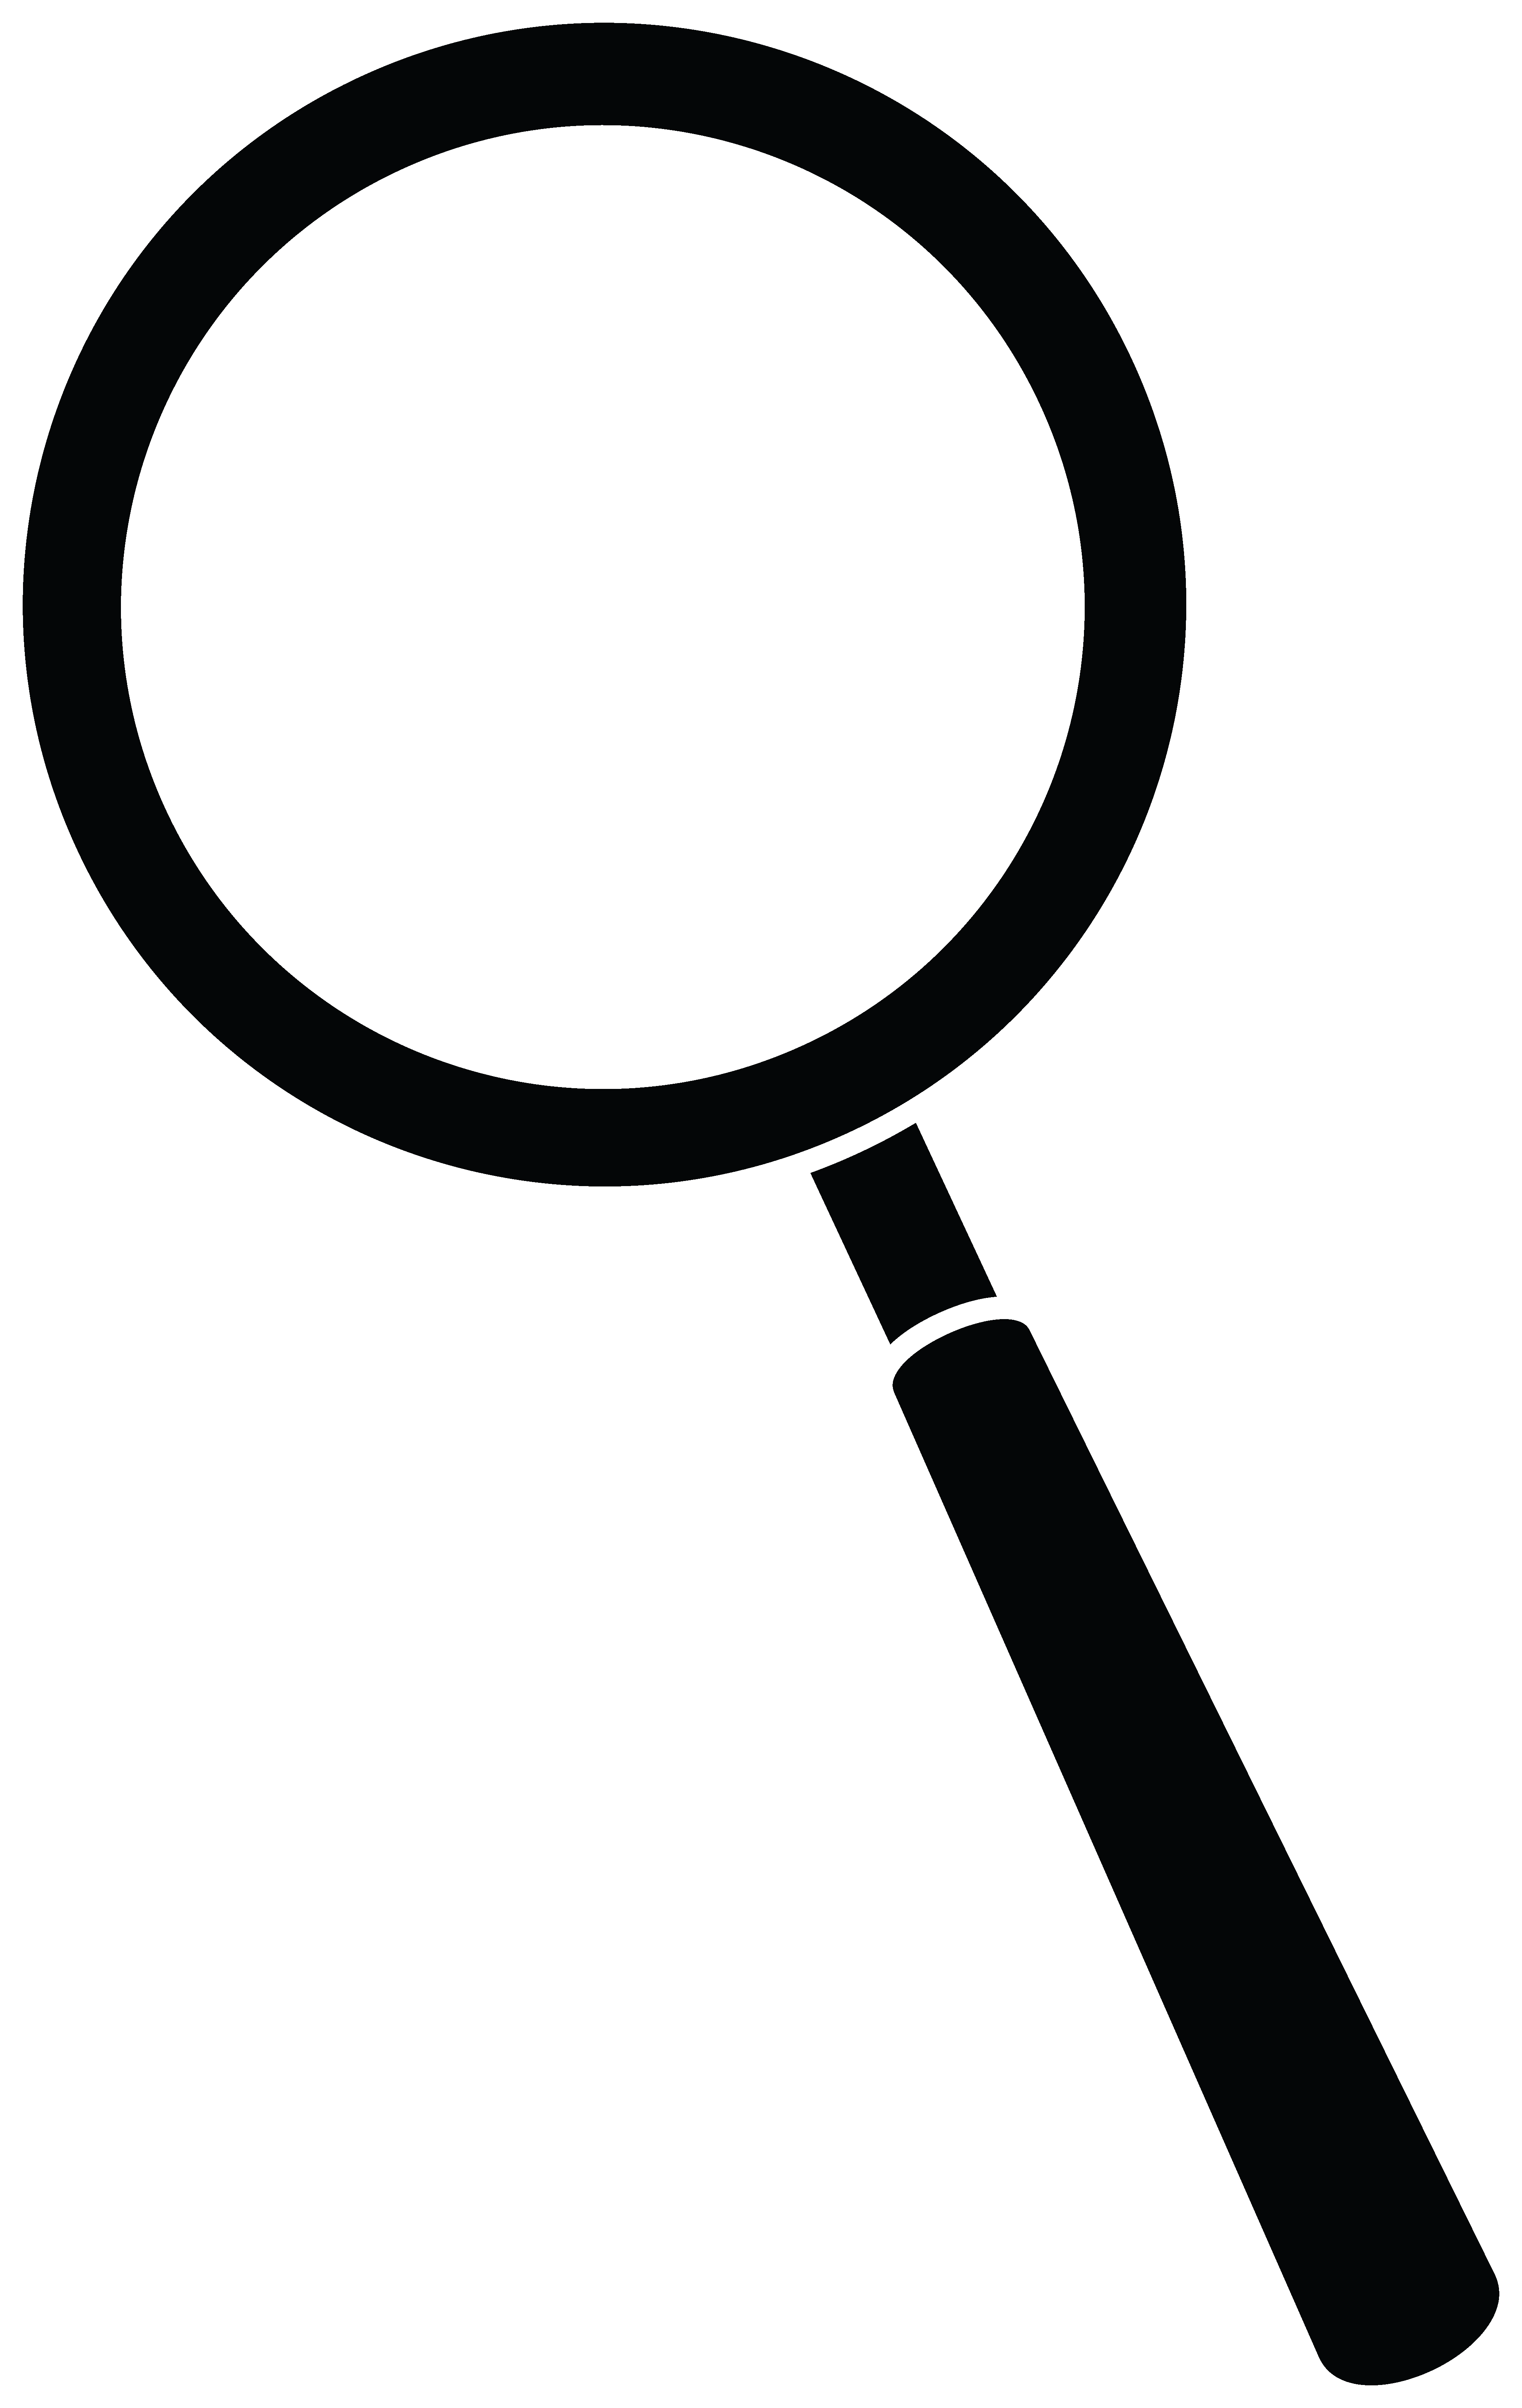 magnifying-glass-clipart- | Clipart Panda - Free Clipart Images